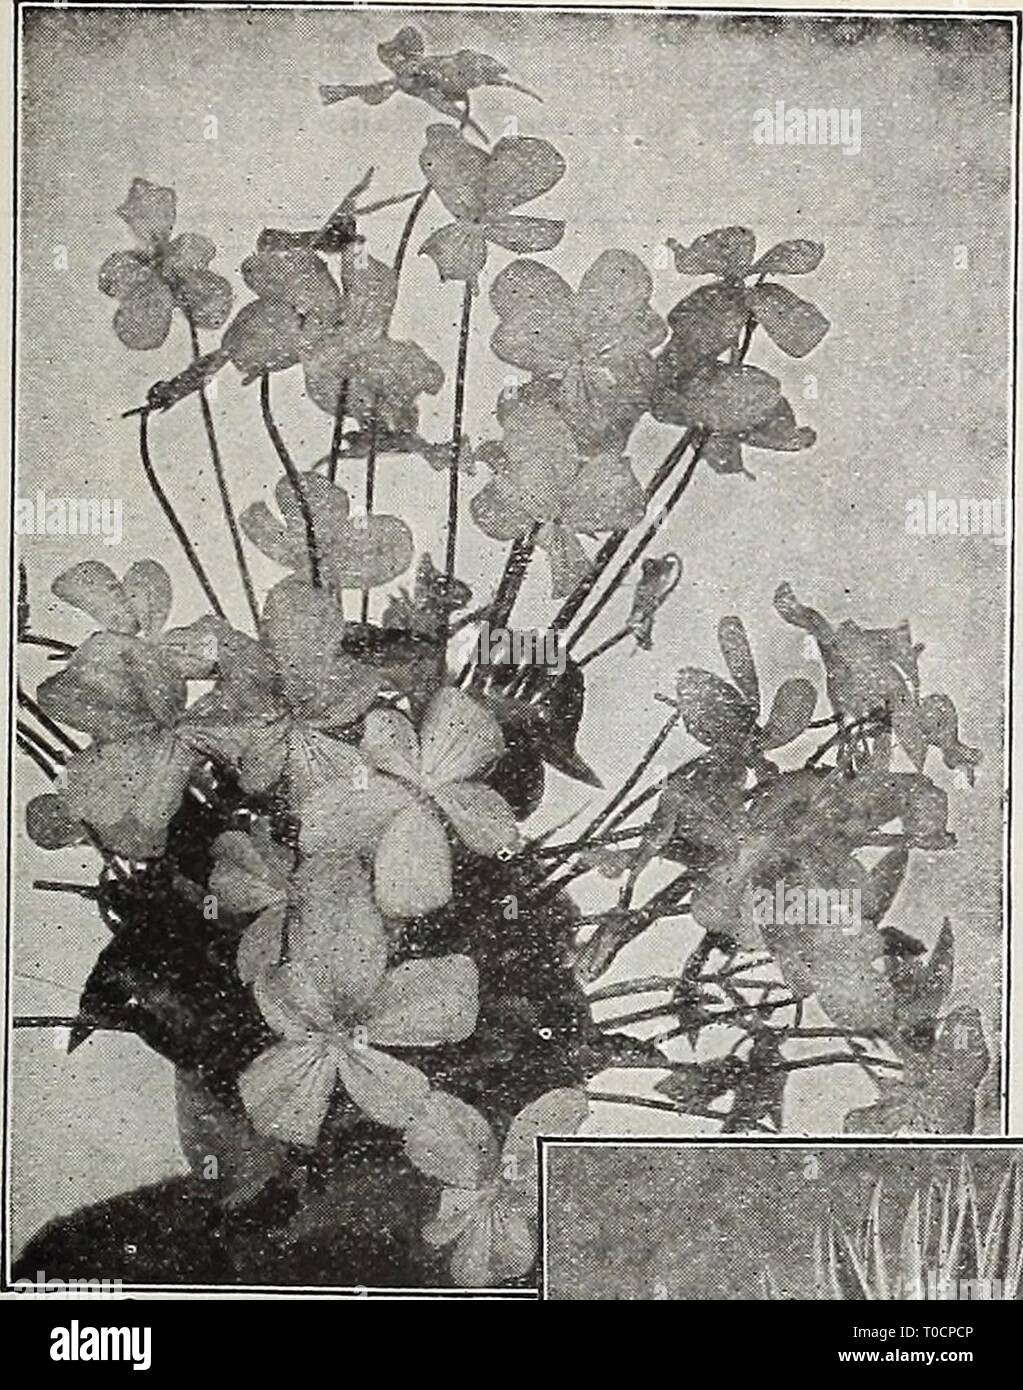 Dreer's garden book 1918 (1918) Dreer's garden book 1918 dreersgardenbook1918henr Year: 1918  Bjjji PHILADELPHIA 1 IjpARDY PEREMIJIAL PbANn'f|ffl 219    Viola Cornuta Purpurea Viola Cornuta Purpurea, or G. Wermig A variety of the tufted Pansy, forming clumps that are a sheet of bloom the entire season, and a most attractive subject for the border; the flowers, which in general appearance closely resemble the Prin- cess of Wales Violet, make it a splendid substitute for the latter during the sum- mer months when these are not to be had. (See cut.) 15 cts. each; $1.50 per doz. HARDY VIOLETS The Stock Photo